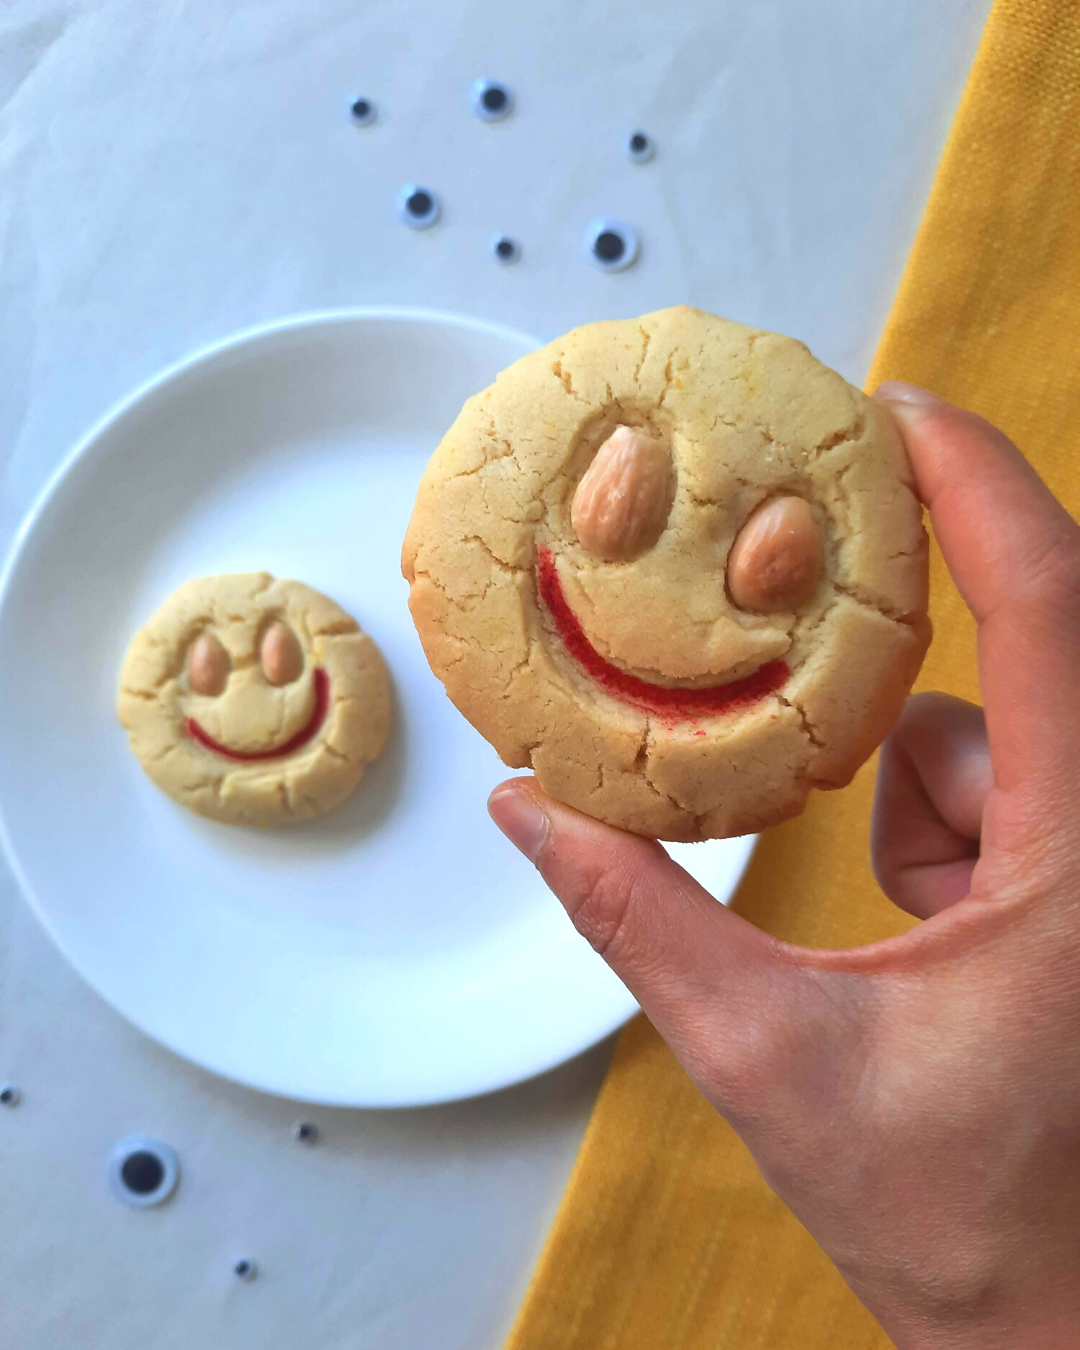 A hand holding up one smiley almond cookie with red lips in front of the camera. Another cookie on the table below the foreground almond cookie.